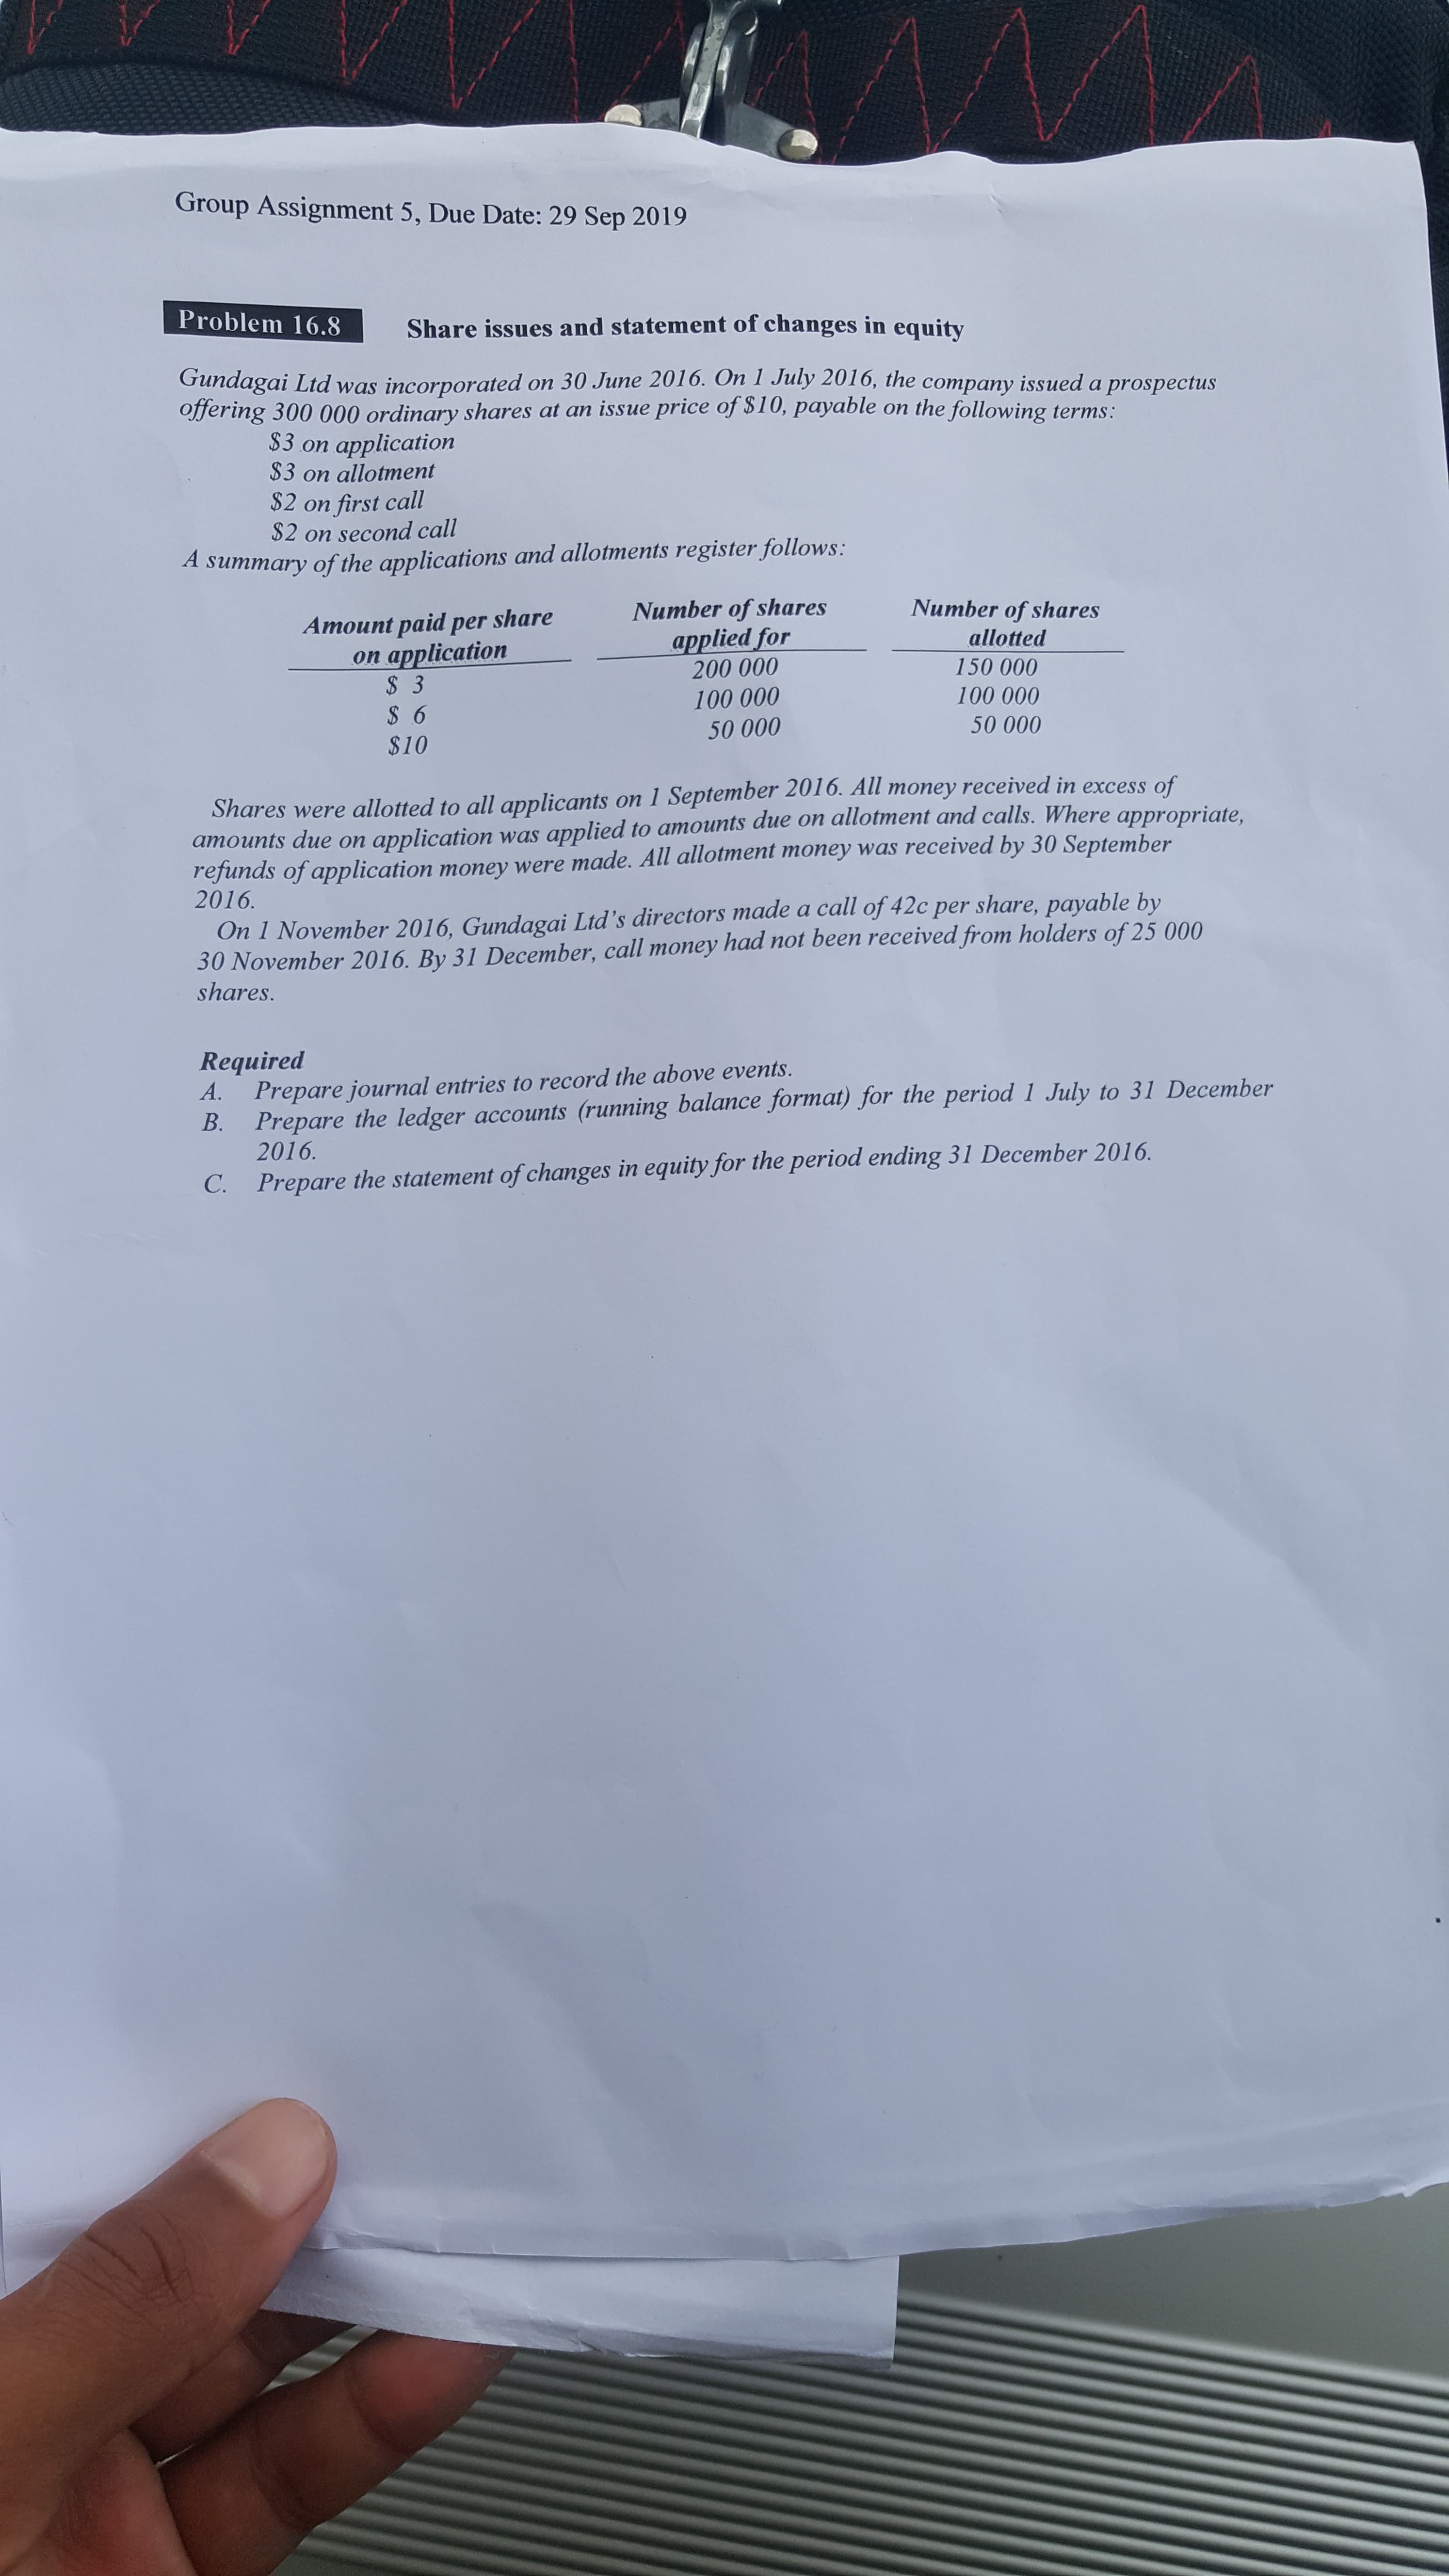 Group Assignment 5, Due Date: 29 Sep 2019
Problem 16.8
Share issues and statement of changes in equity
Gundagai Ltd was incorporated on 30 June 2016. On 1 July 2016, the company issued a prospectus
offering 300 000 ordinary shares at an issue price of $10, payable
on the following terms:
application
$3 on allotment
$3 on
$2 on first call
$2 on second call
A summary of the applications and allotments register follows:
Number of shares
applied for
200 000
Number of shares
allotted
Amount paid per share
on application
$ 3
150 000
100 000
100 000
$6
50 000
50 000
$10
on 1 September 2016. All money received in excess of
applied to amounts due on allotment and calls. Where appropriate,
Shares were allotted to all applicants
application was
refunds of application money were made. All allotment money was received by 30 September
2016.
атоиnts duе оn
On 1 November 2016, Gundagai Ltd's directors made a call of 42c per share, payable by
30 November 2016. By 31 December, call money had not been received from holders of 25 000
shares.
Required
Prepare the ledger accounts (running balance format) for the period 1 July to 31 December
В.
А.
Prepare journal entries to record the above events.
2016.
Prepare the statement of changes in equity for the period ending 31 December 2016
C.
